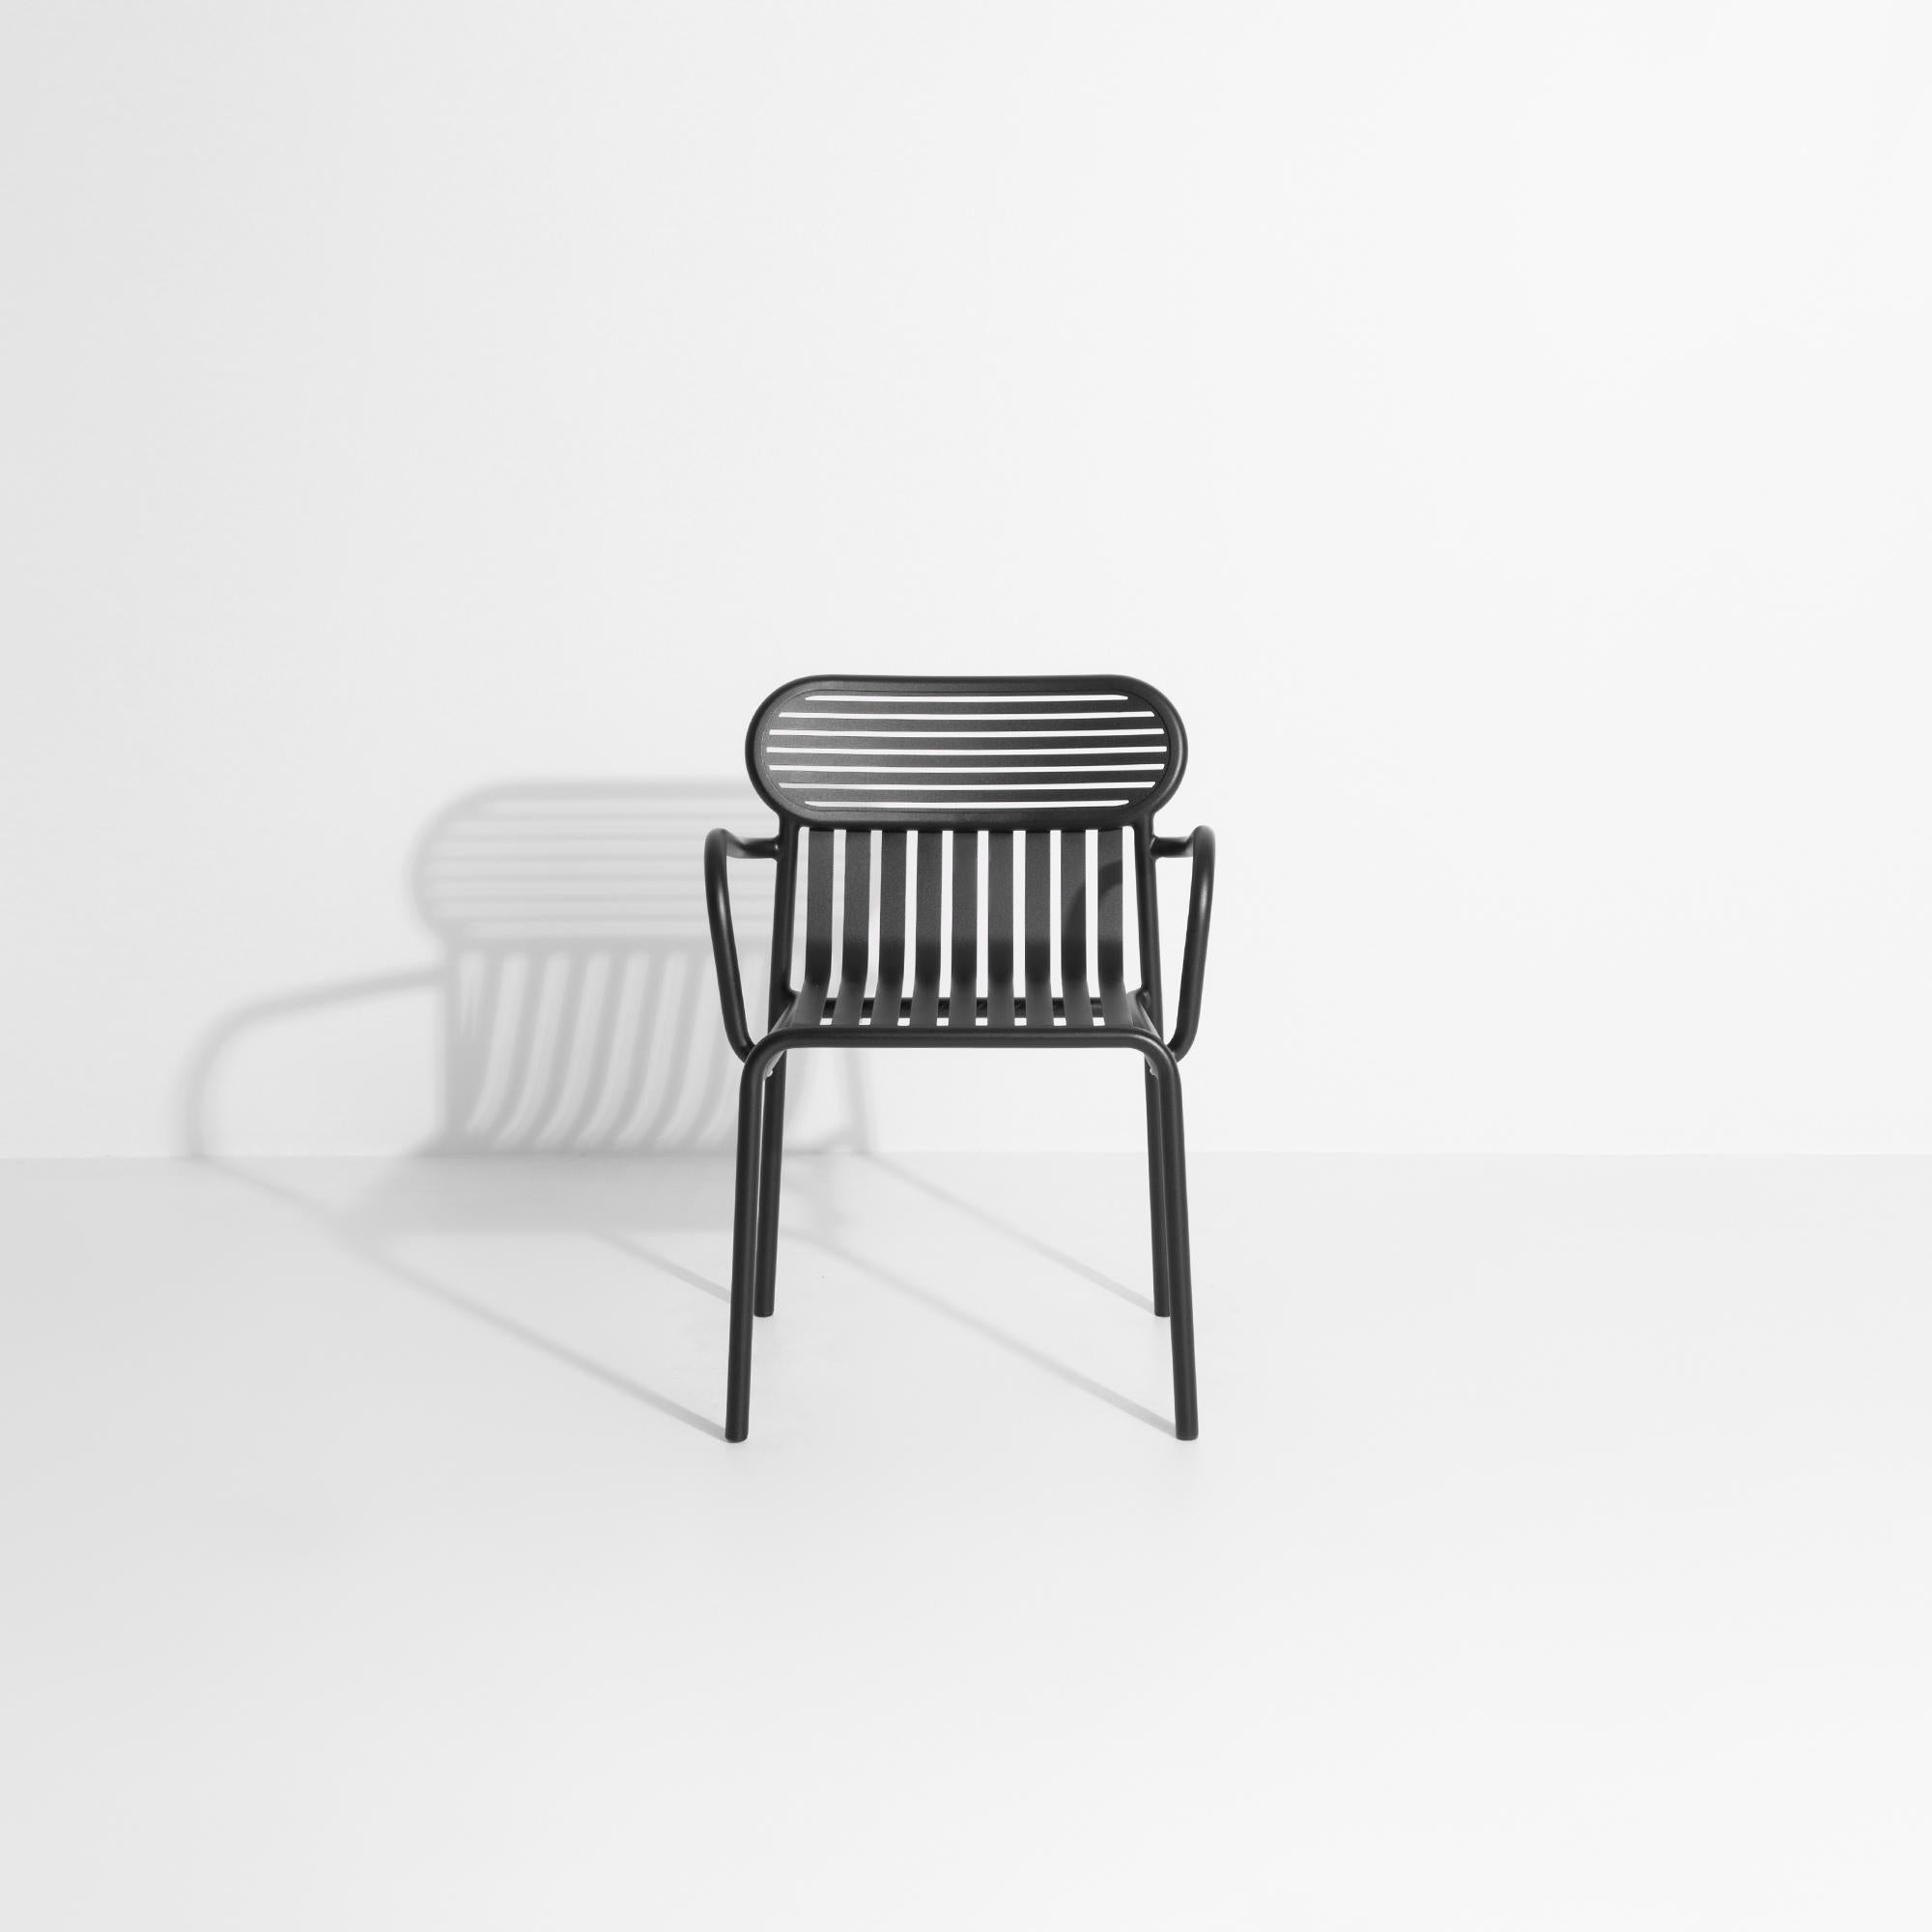 Petite Friture Week-End Bridge Chair in Black Aluminium by Studio BrichetZiegler In New Condition For Sale In Brooklyn, NY